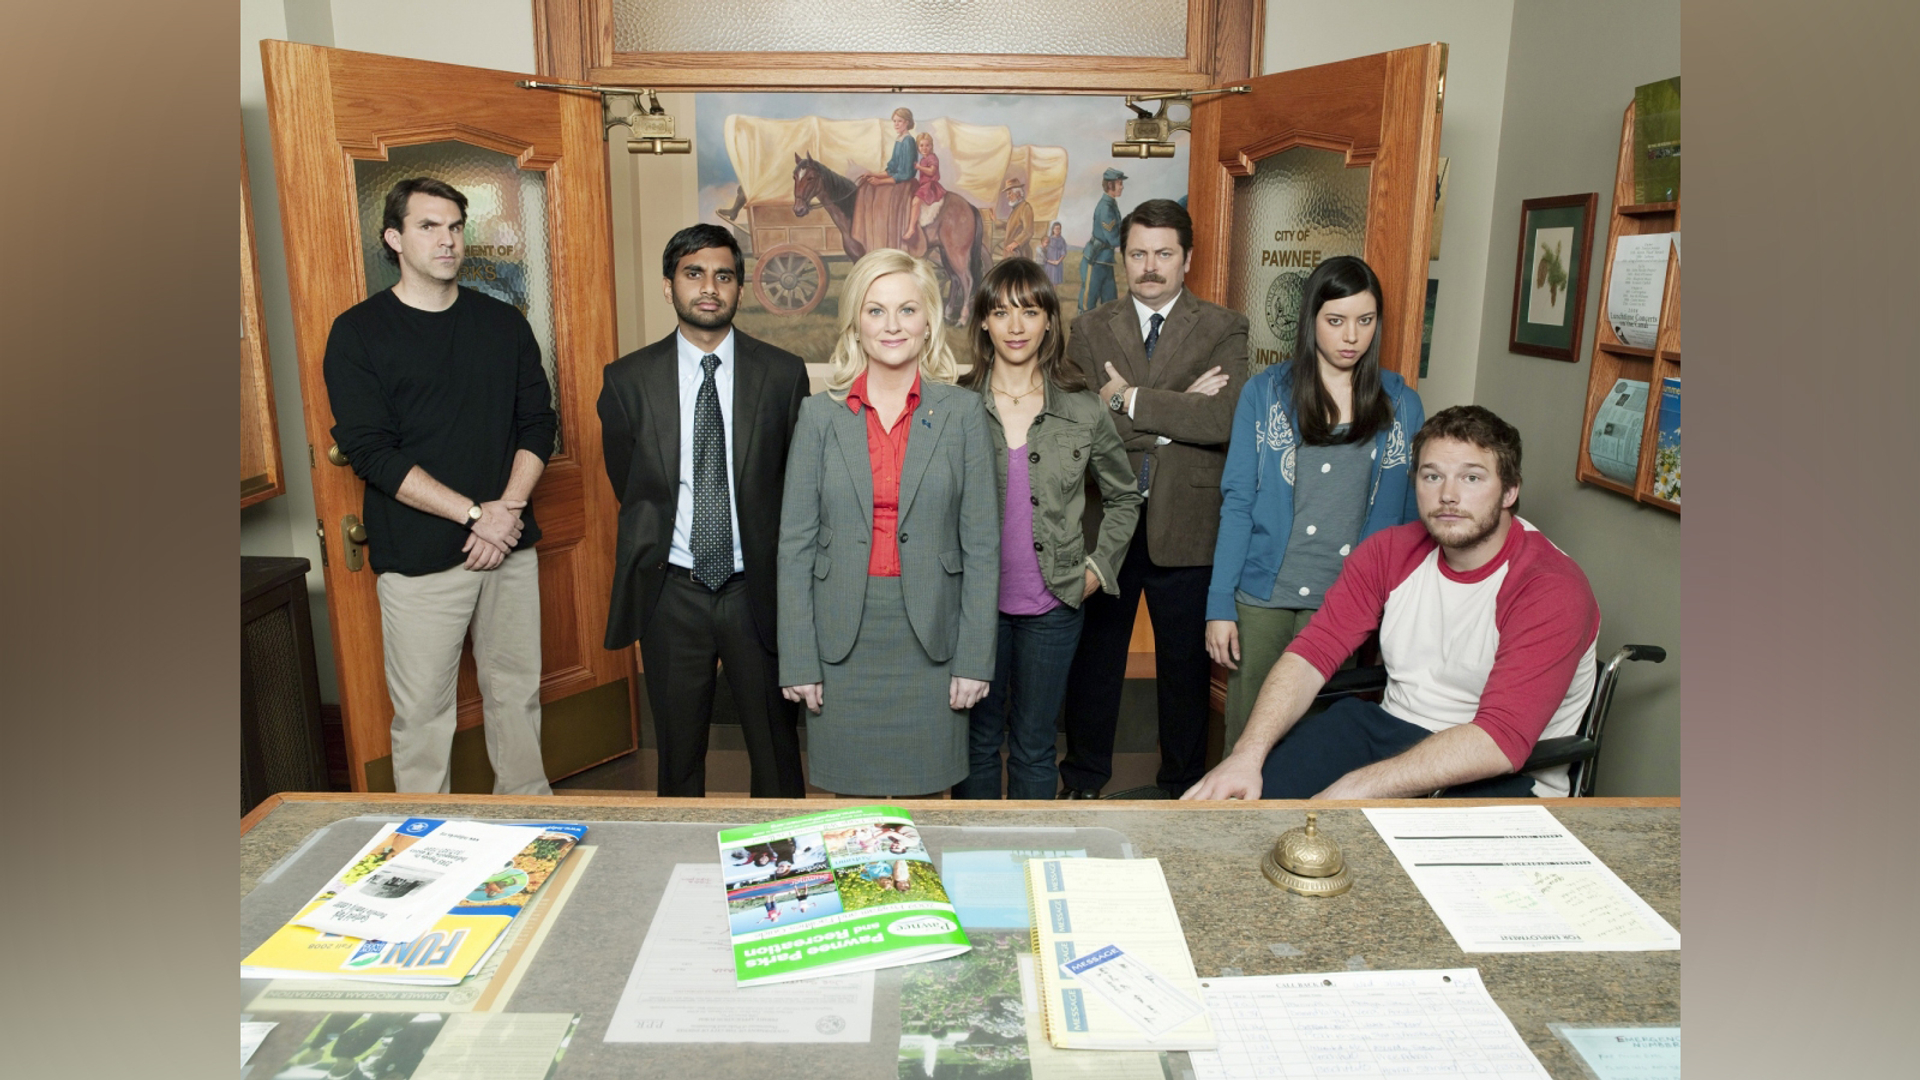 Cast of Parks and Recreation